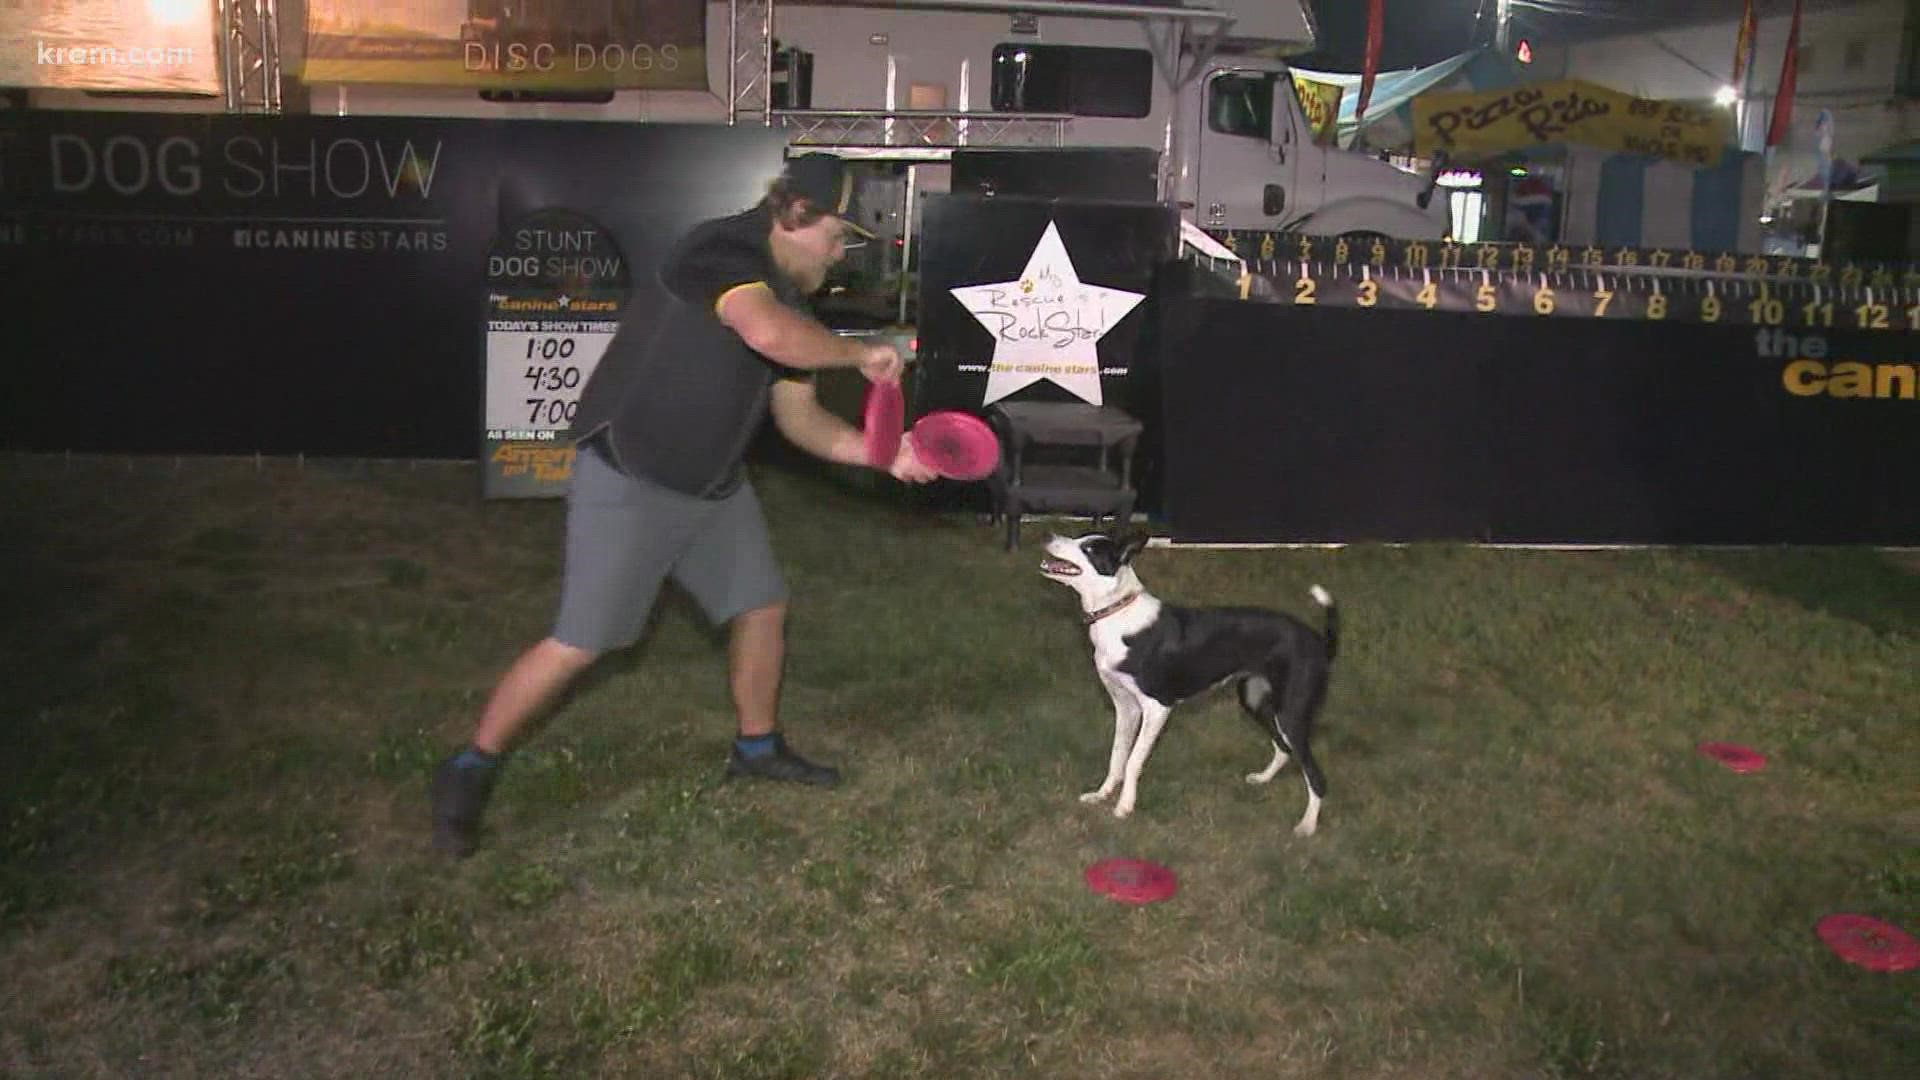 A  dog trick show featured on America's Got Talent will be featured at the fair this year.